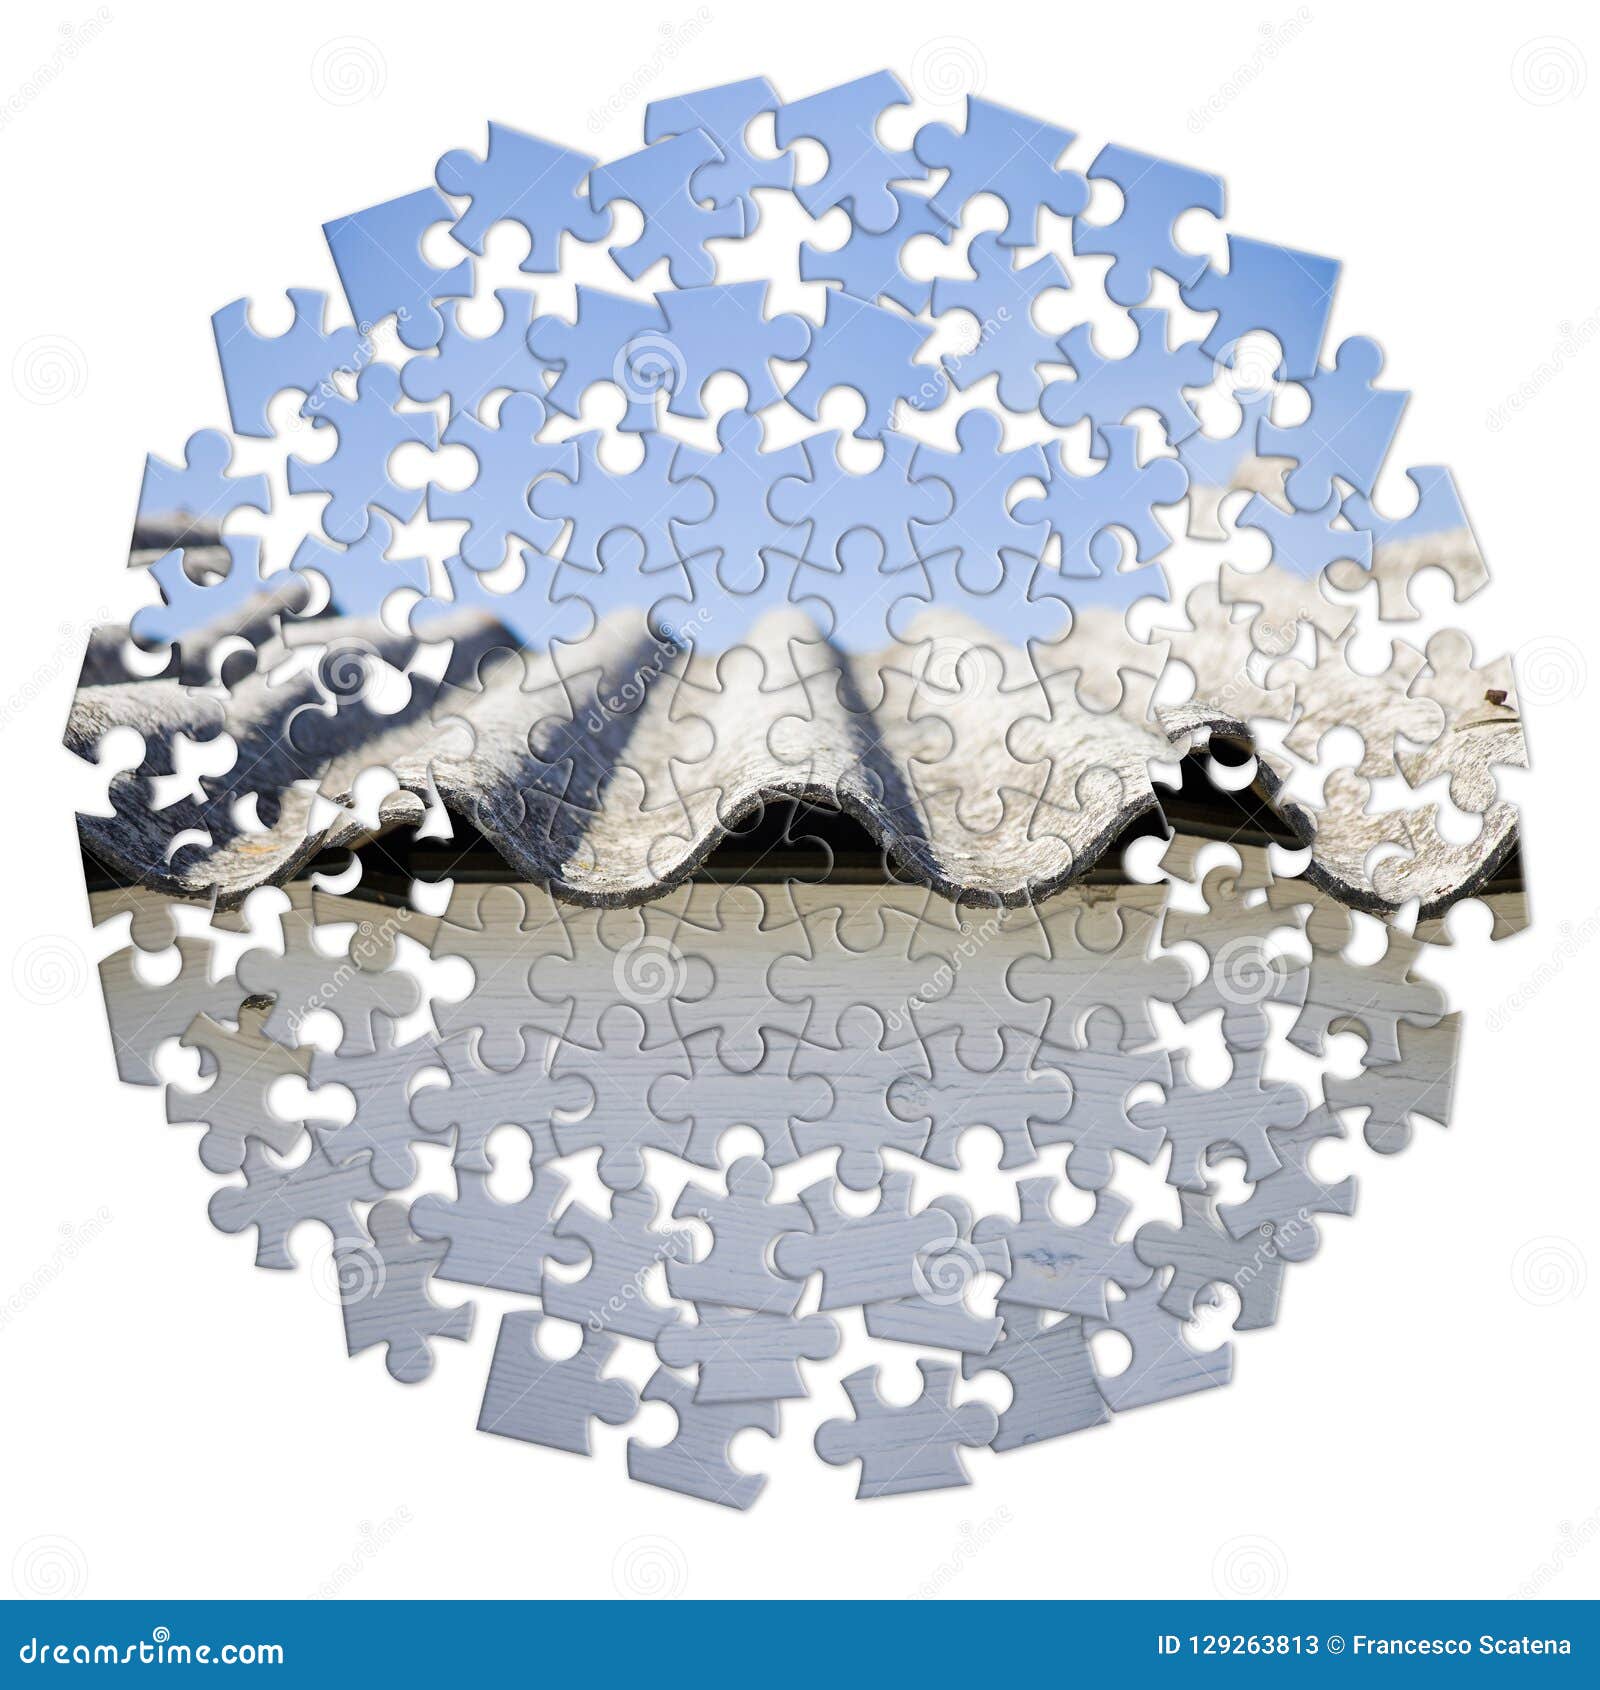 asbestos removal - concept image in circular jigsaw puzzle shap